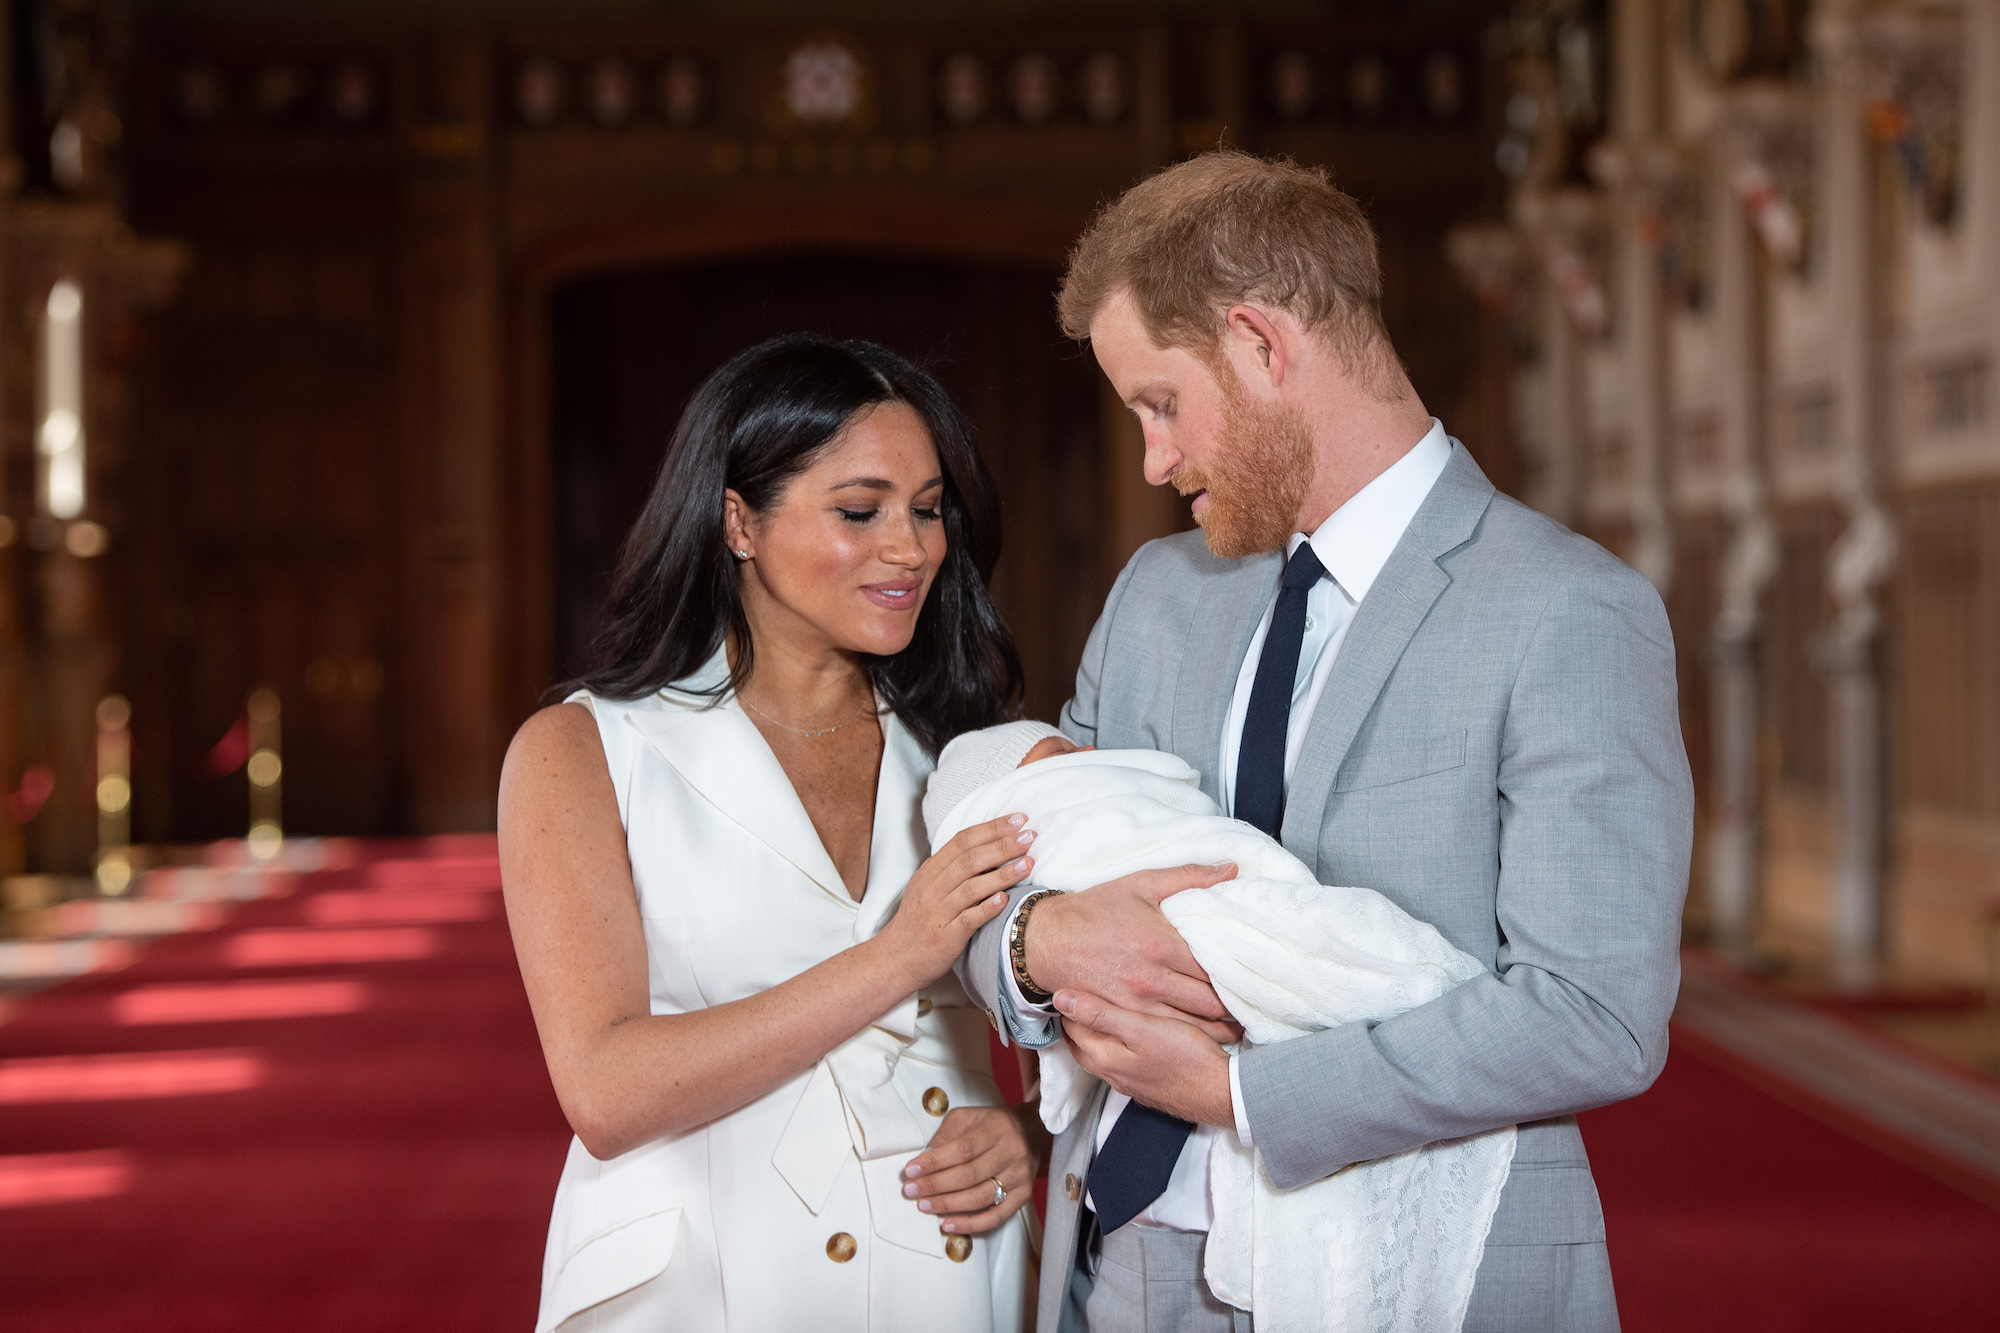 (L-R) Meghan Markle smiling and Prince Harry holding baby Archie